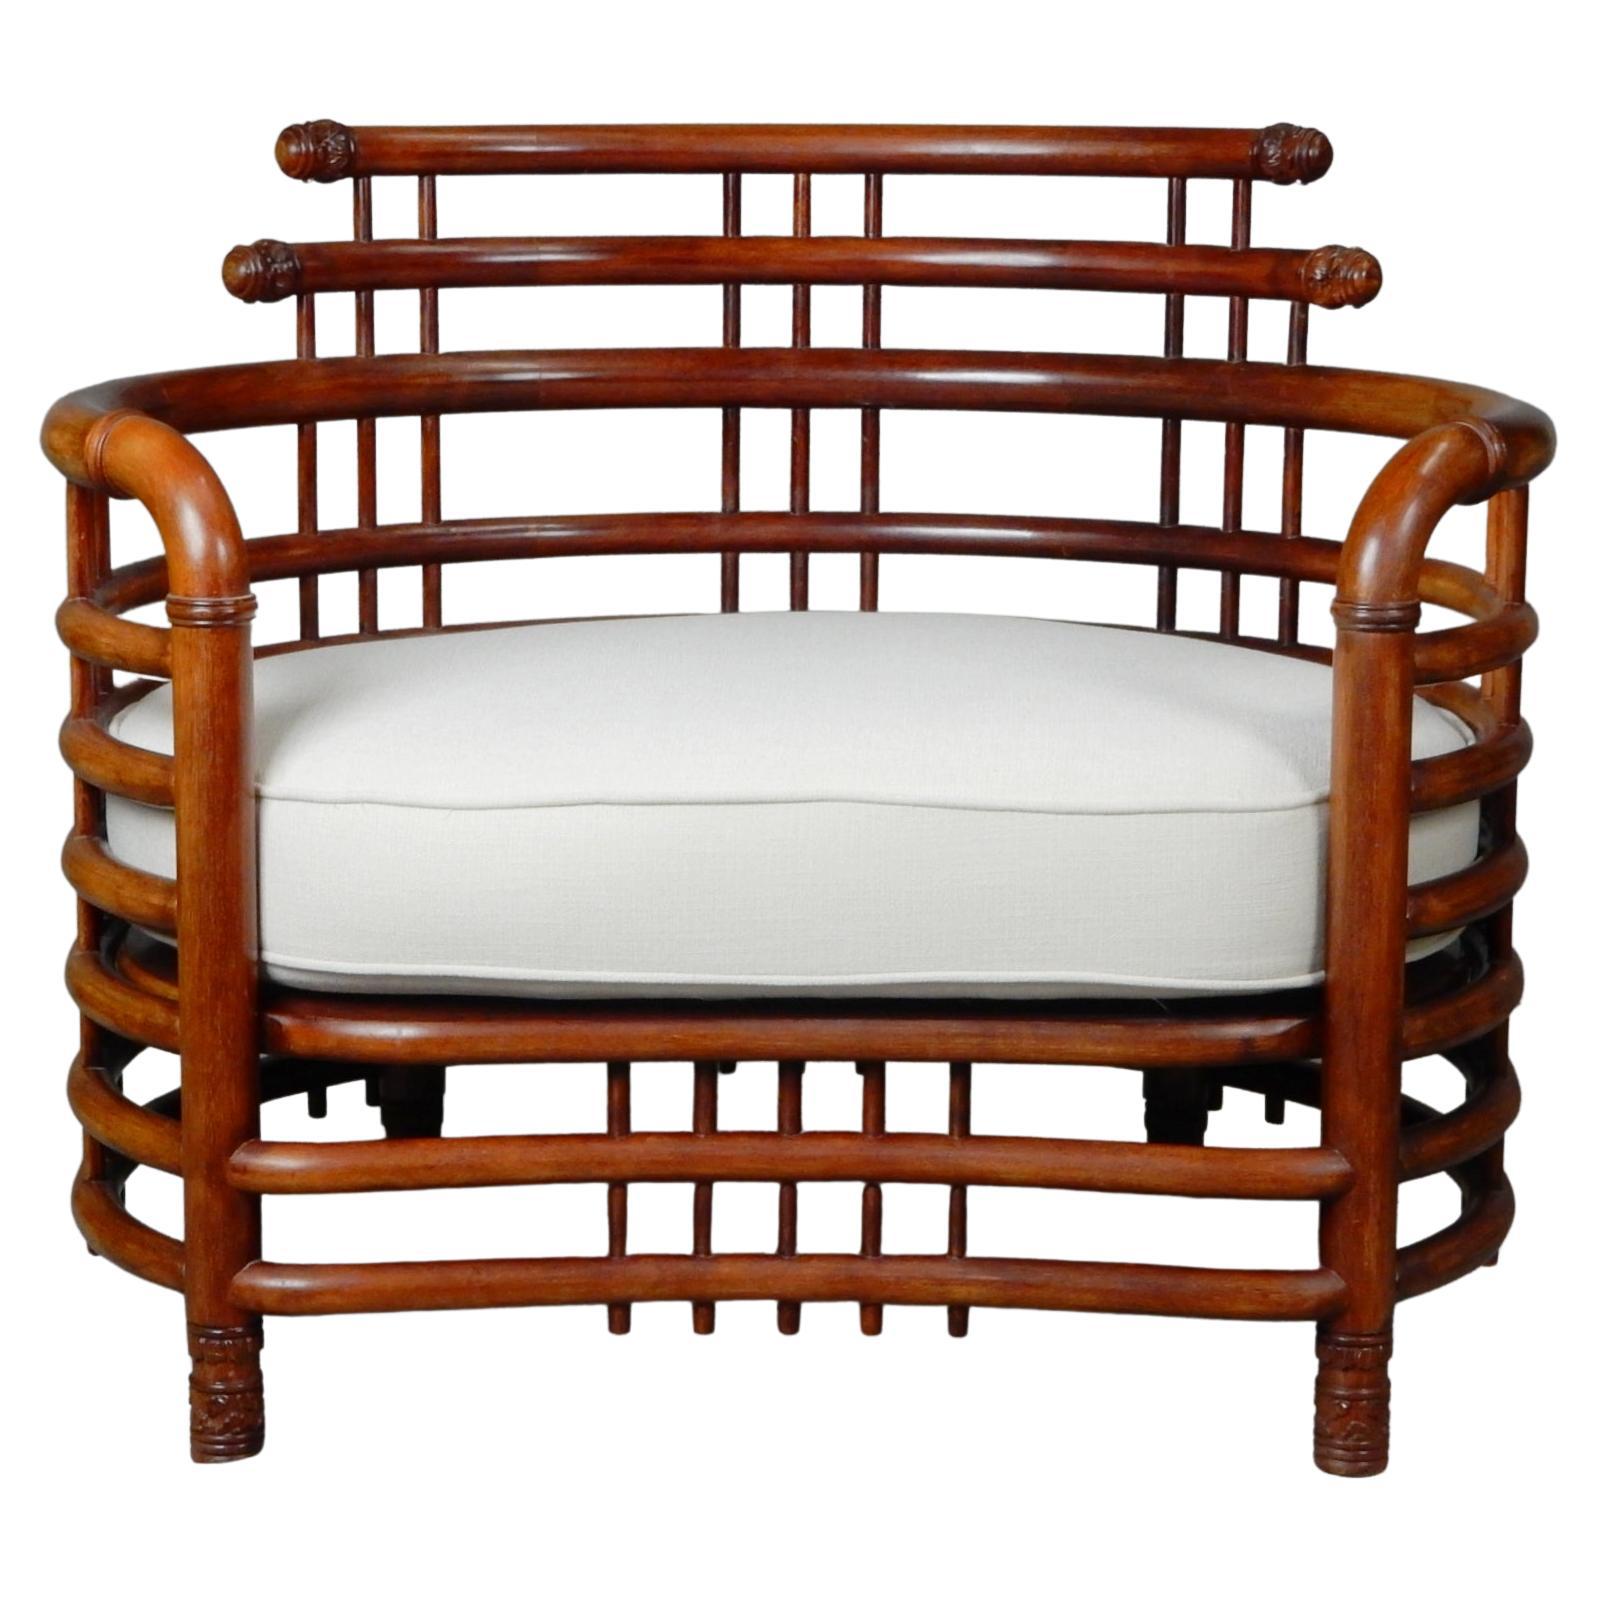 Exceptional pair of 1950's birdcage lounge chairs crafted of Burmese Teak.
These are big lounge chairs. Very heavy, solid and well crafted each weighing 65lbs.
No damage or repairs to frames. Newly upholstered cushions. 
Not marked by designer or